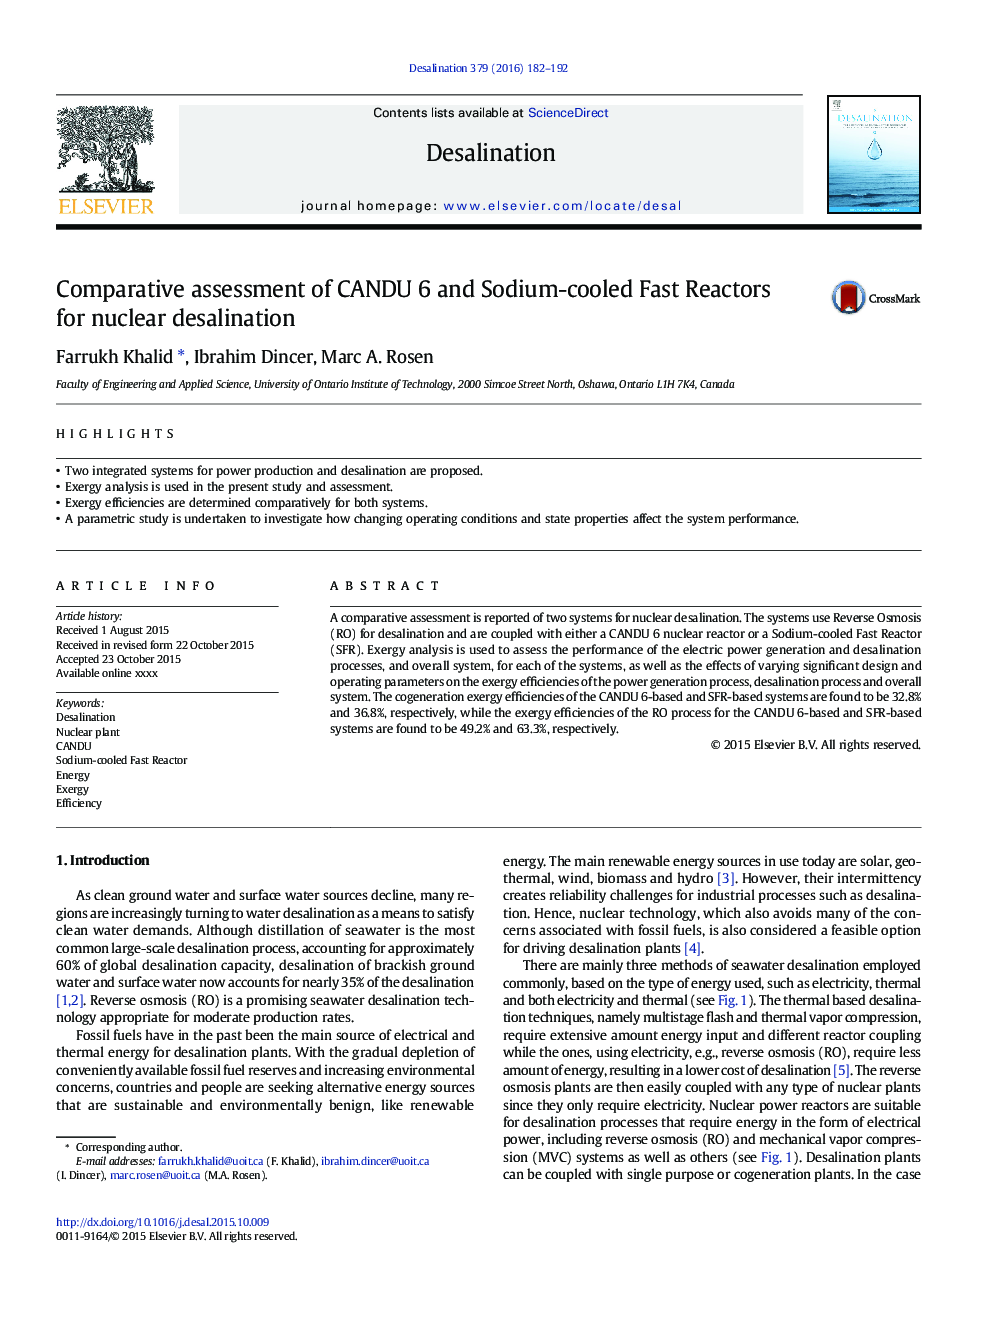 Comparative assessment of CANDU 6 and Sodium-cooled Fast Reactors for nuclear desalination